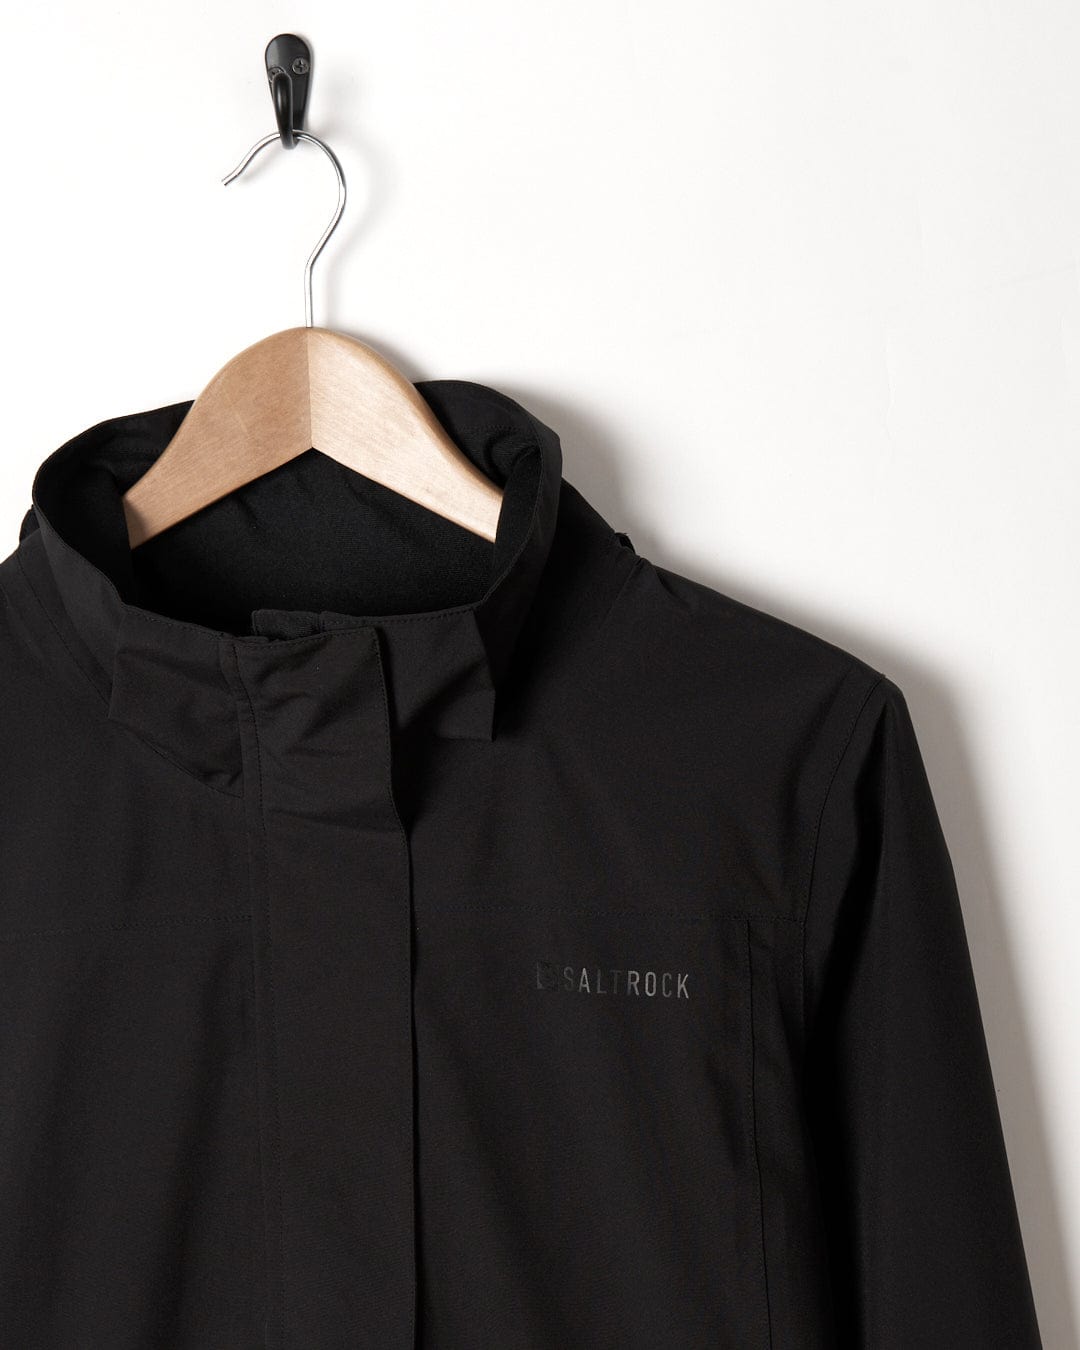 Aubrey - Womens Waterproof Jacket - Black by Saltrock hanging on a wooden hanger against a white background, with the brand "Saltrock" embroidered on the left side.